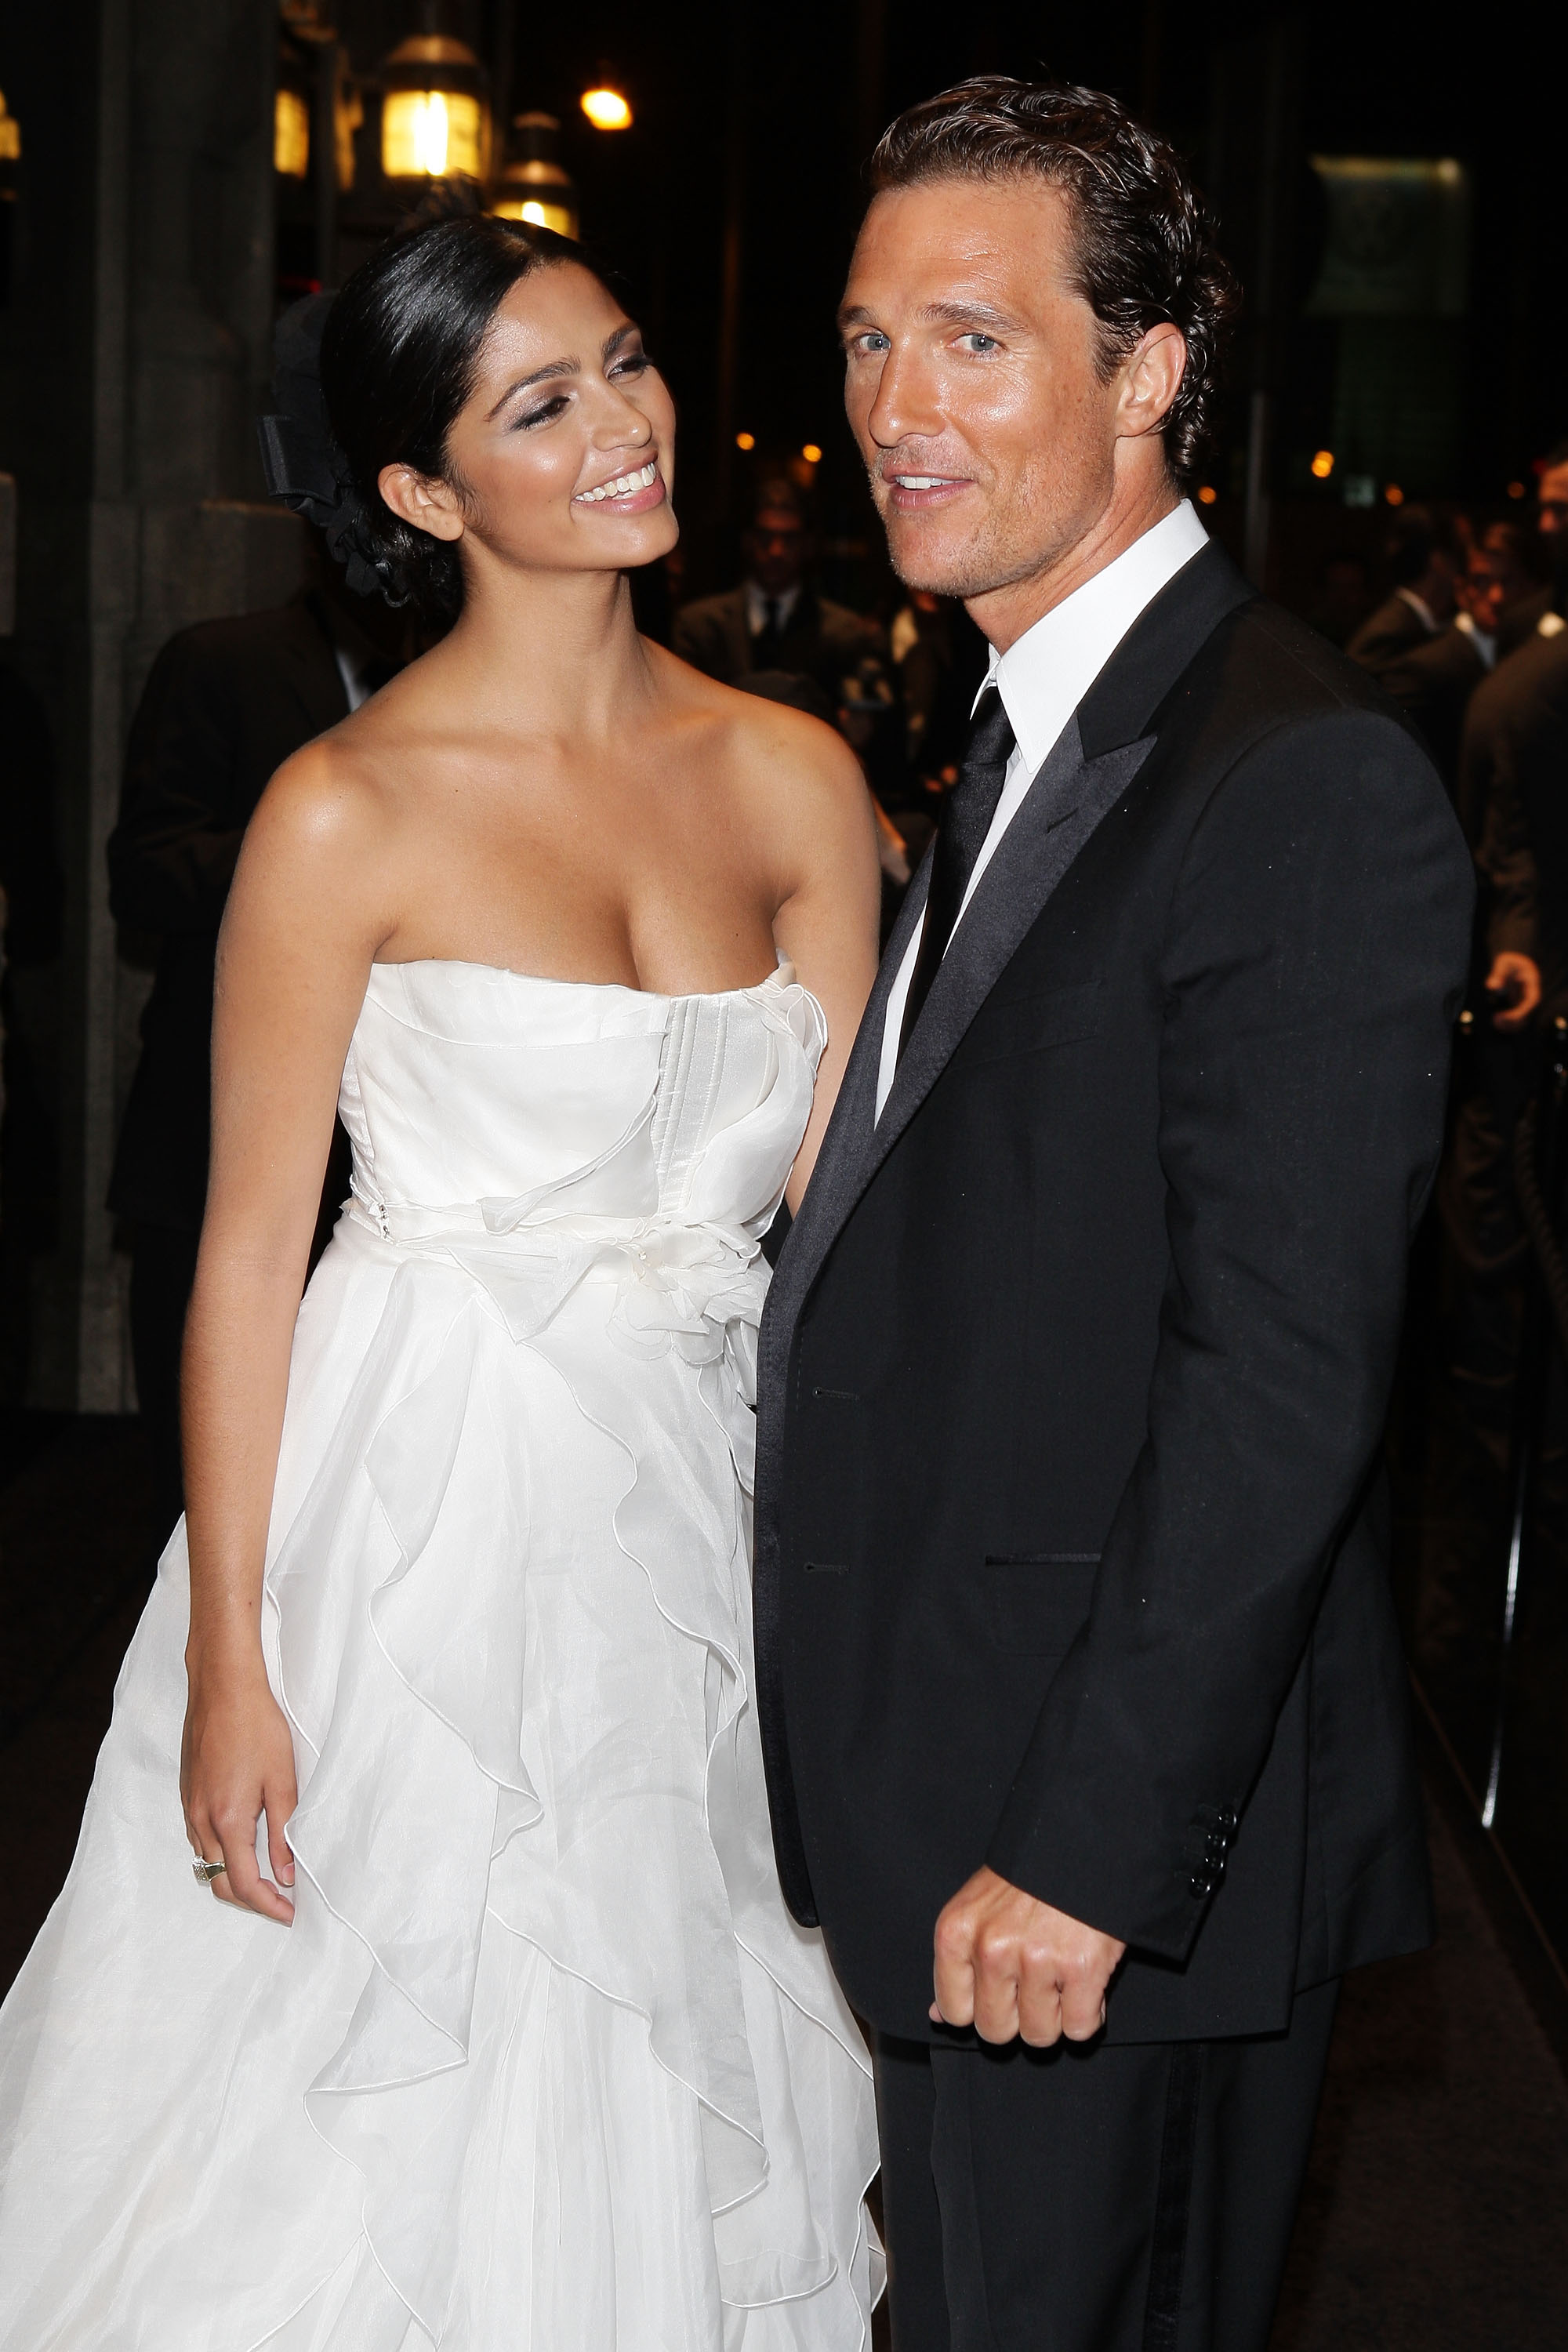 Matthew McConaughey & Camila Alves in  Milan Italy in 2008 | Getty Images